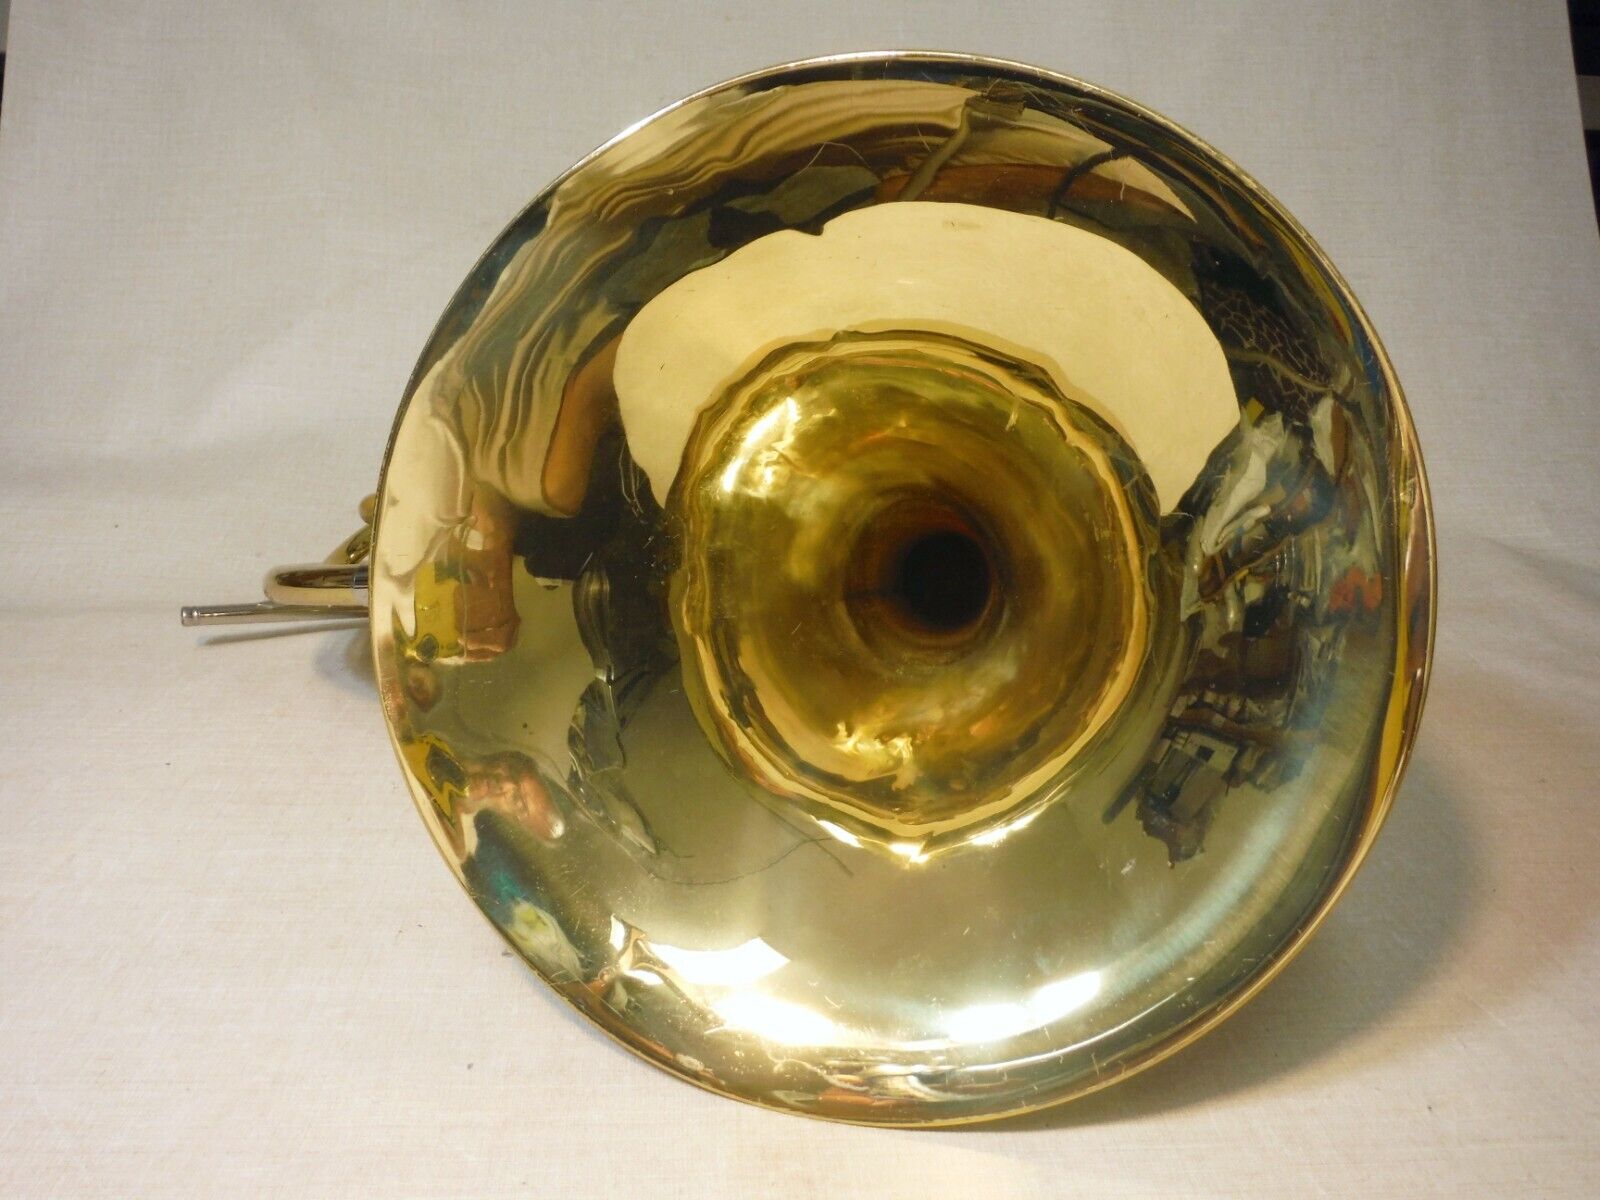 JUPITER JHR-852 DOUBLE FRENCH HORN BRASS WORKING GOOD W/DENTS CASE MOUTHPIECE 15